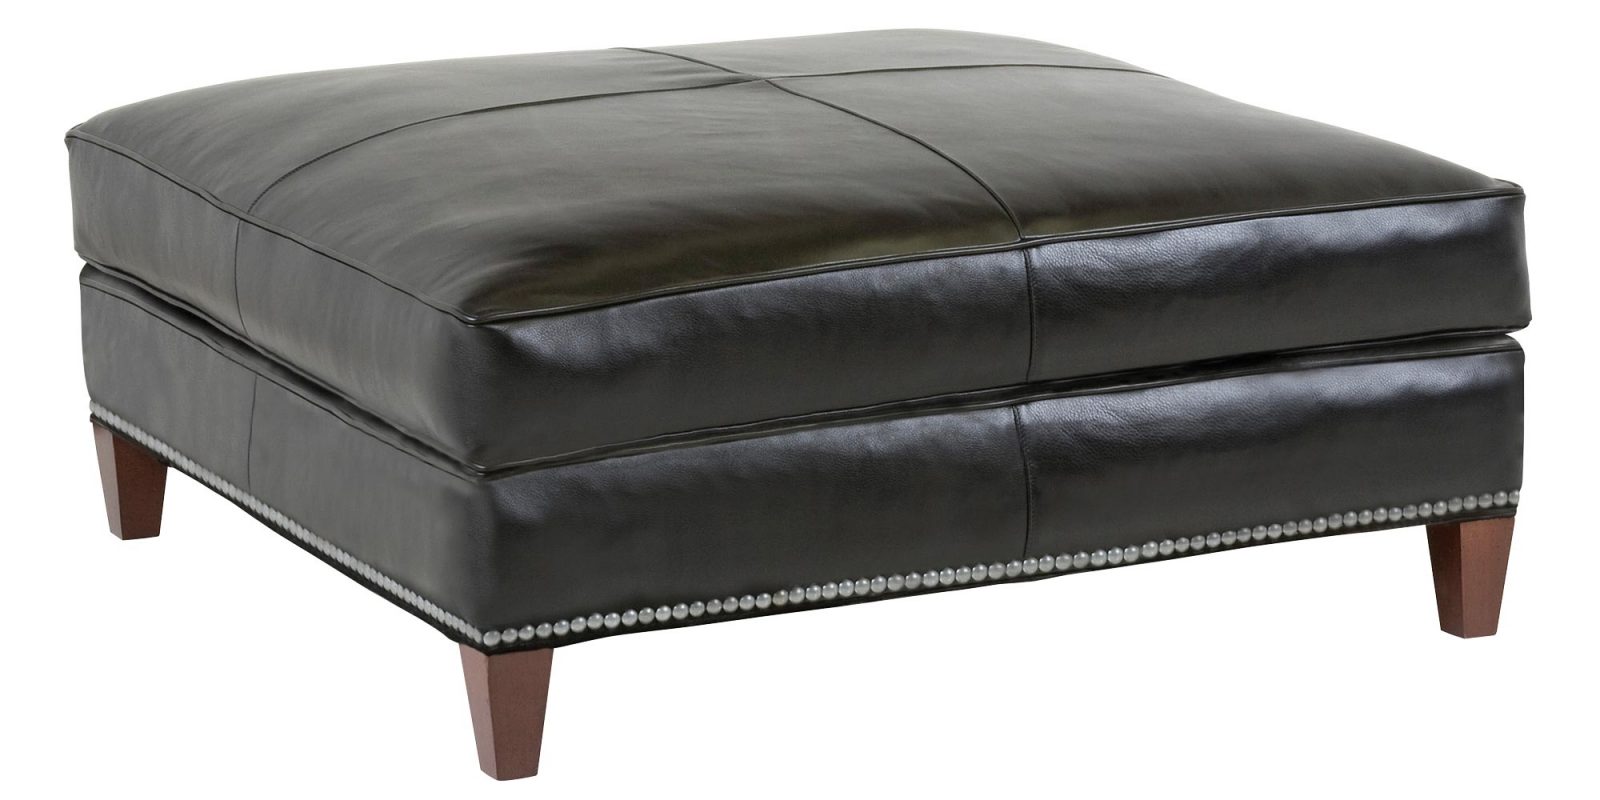 tufted leather ott coffee table best unique and creative square black with metal nail accent tray brown stai round storage pottery barn tables shelf white decorations high dining